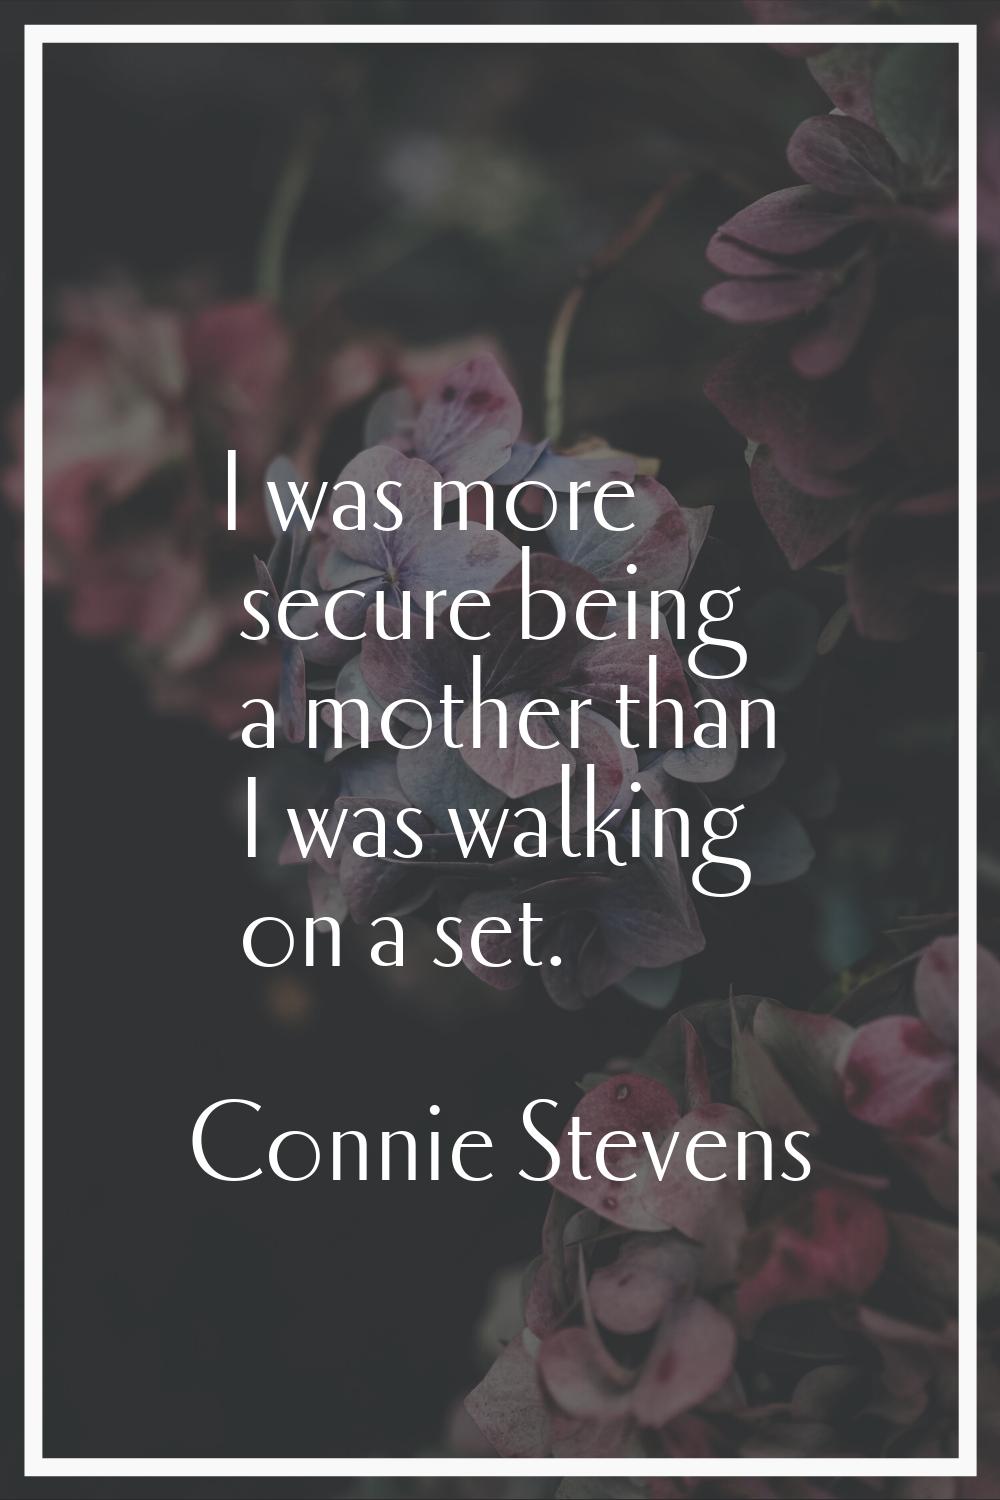 I was more secure being a mother than I was walking on a set.